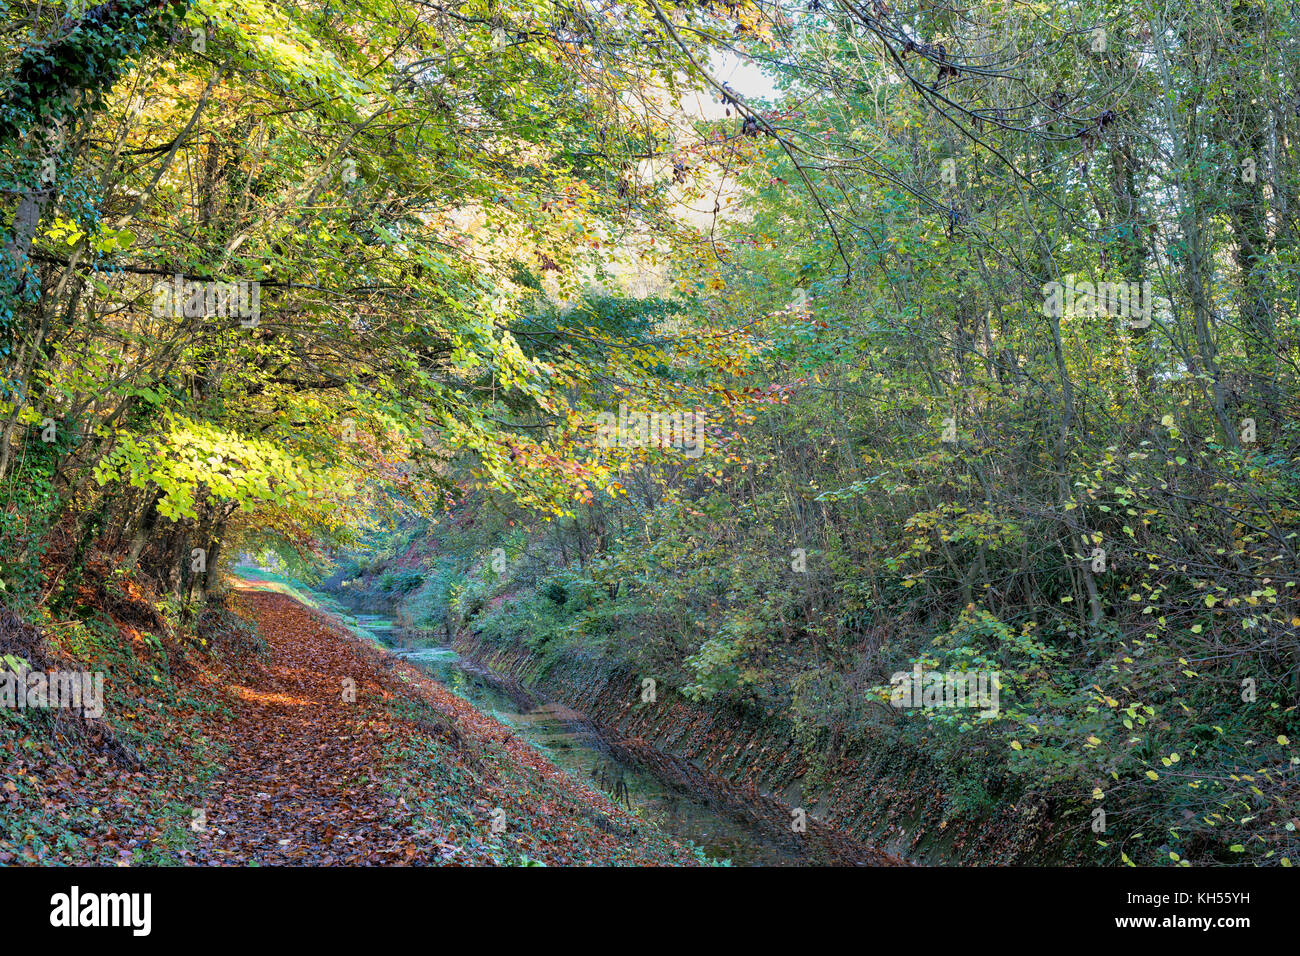 Autumn beech trees along the embankment of the old cotswold Sapperton Canal and Tunnel. Coates, Cirencester, Gloucestershire, UK Stock Photo